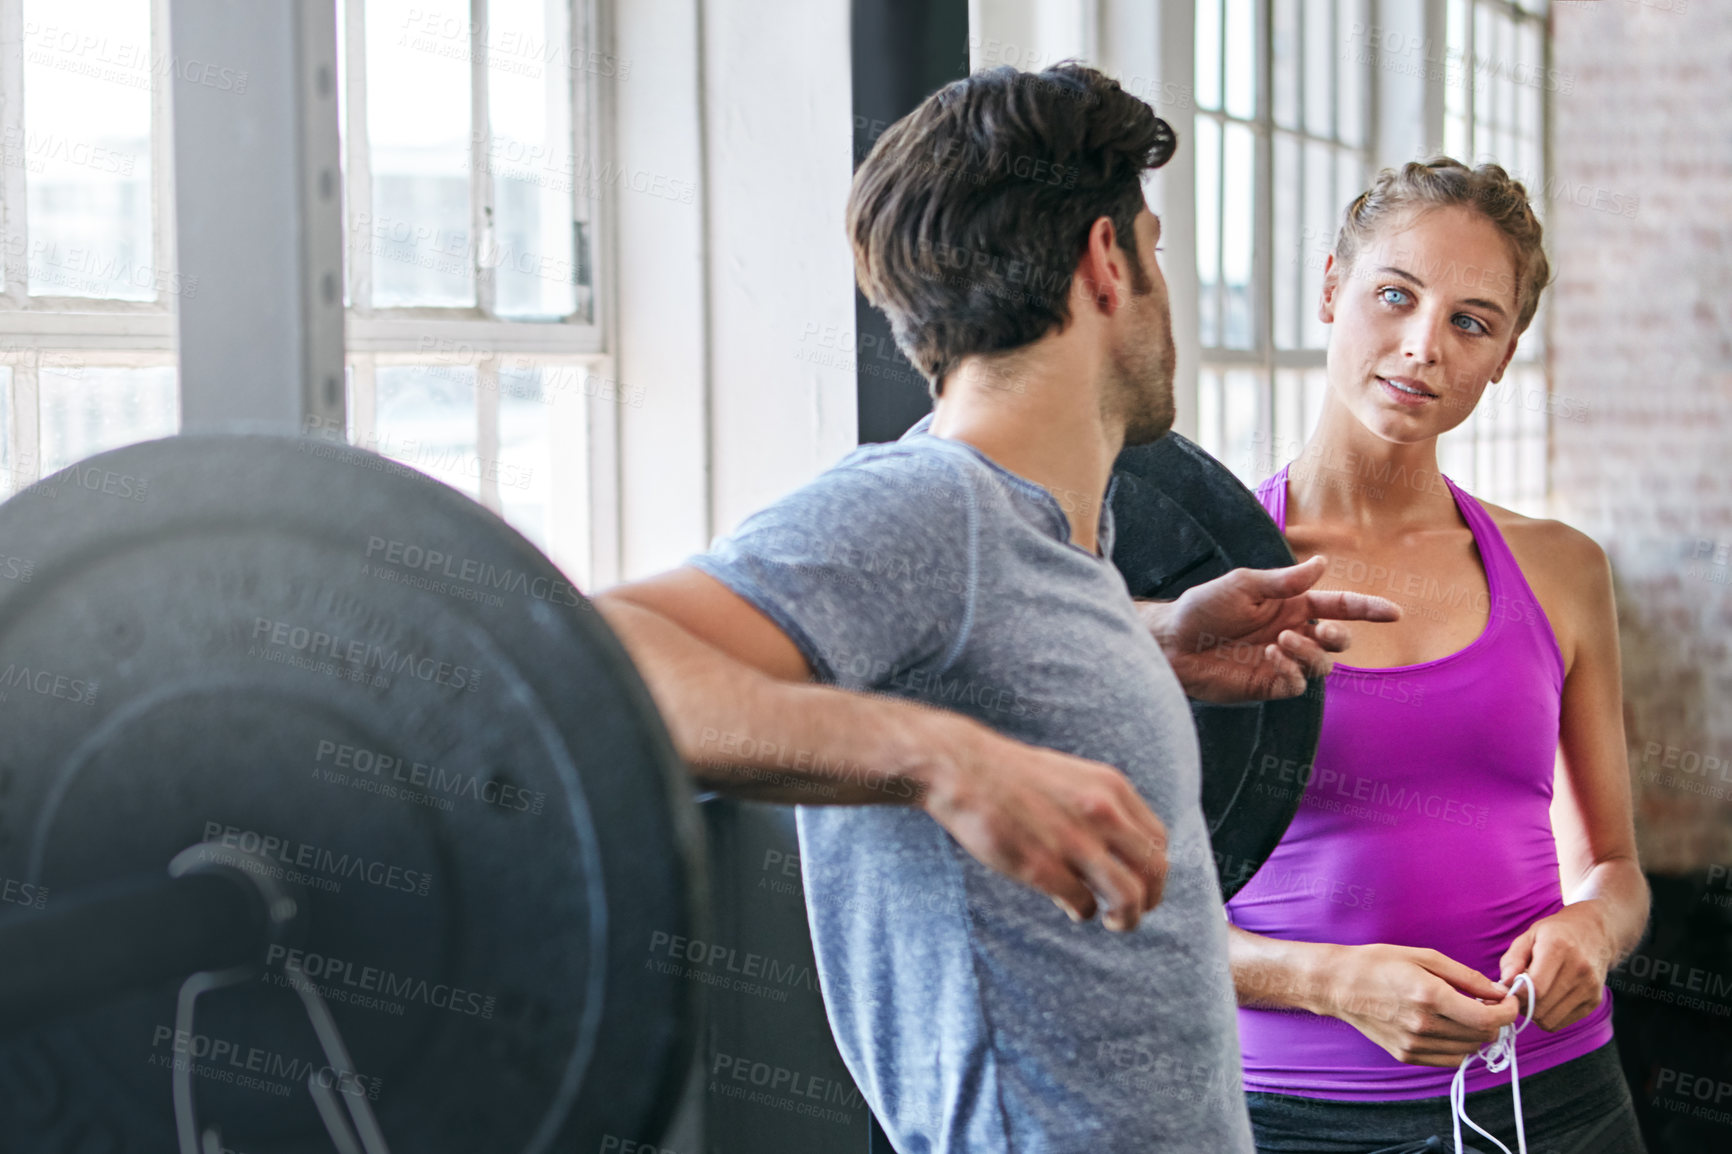 Buy stock photo Shot of two people chatting at the gym